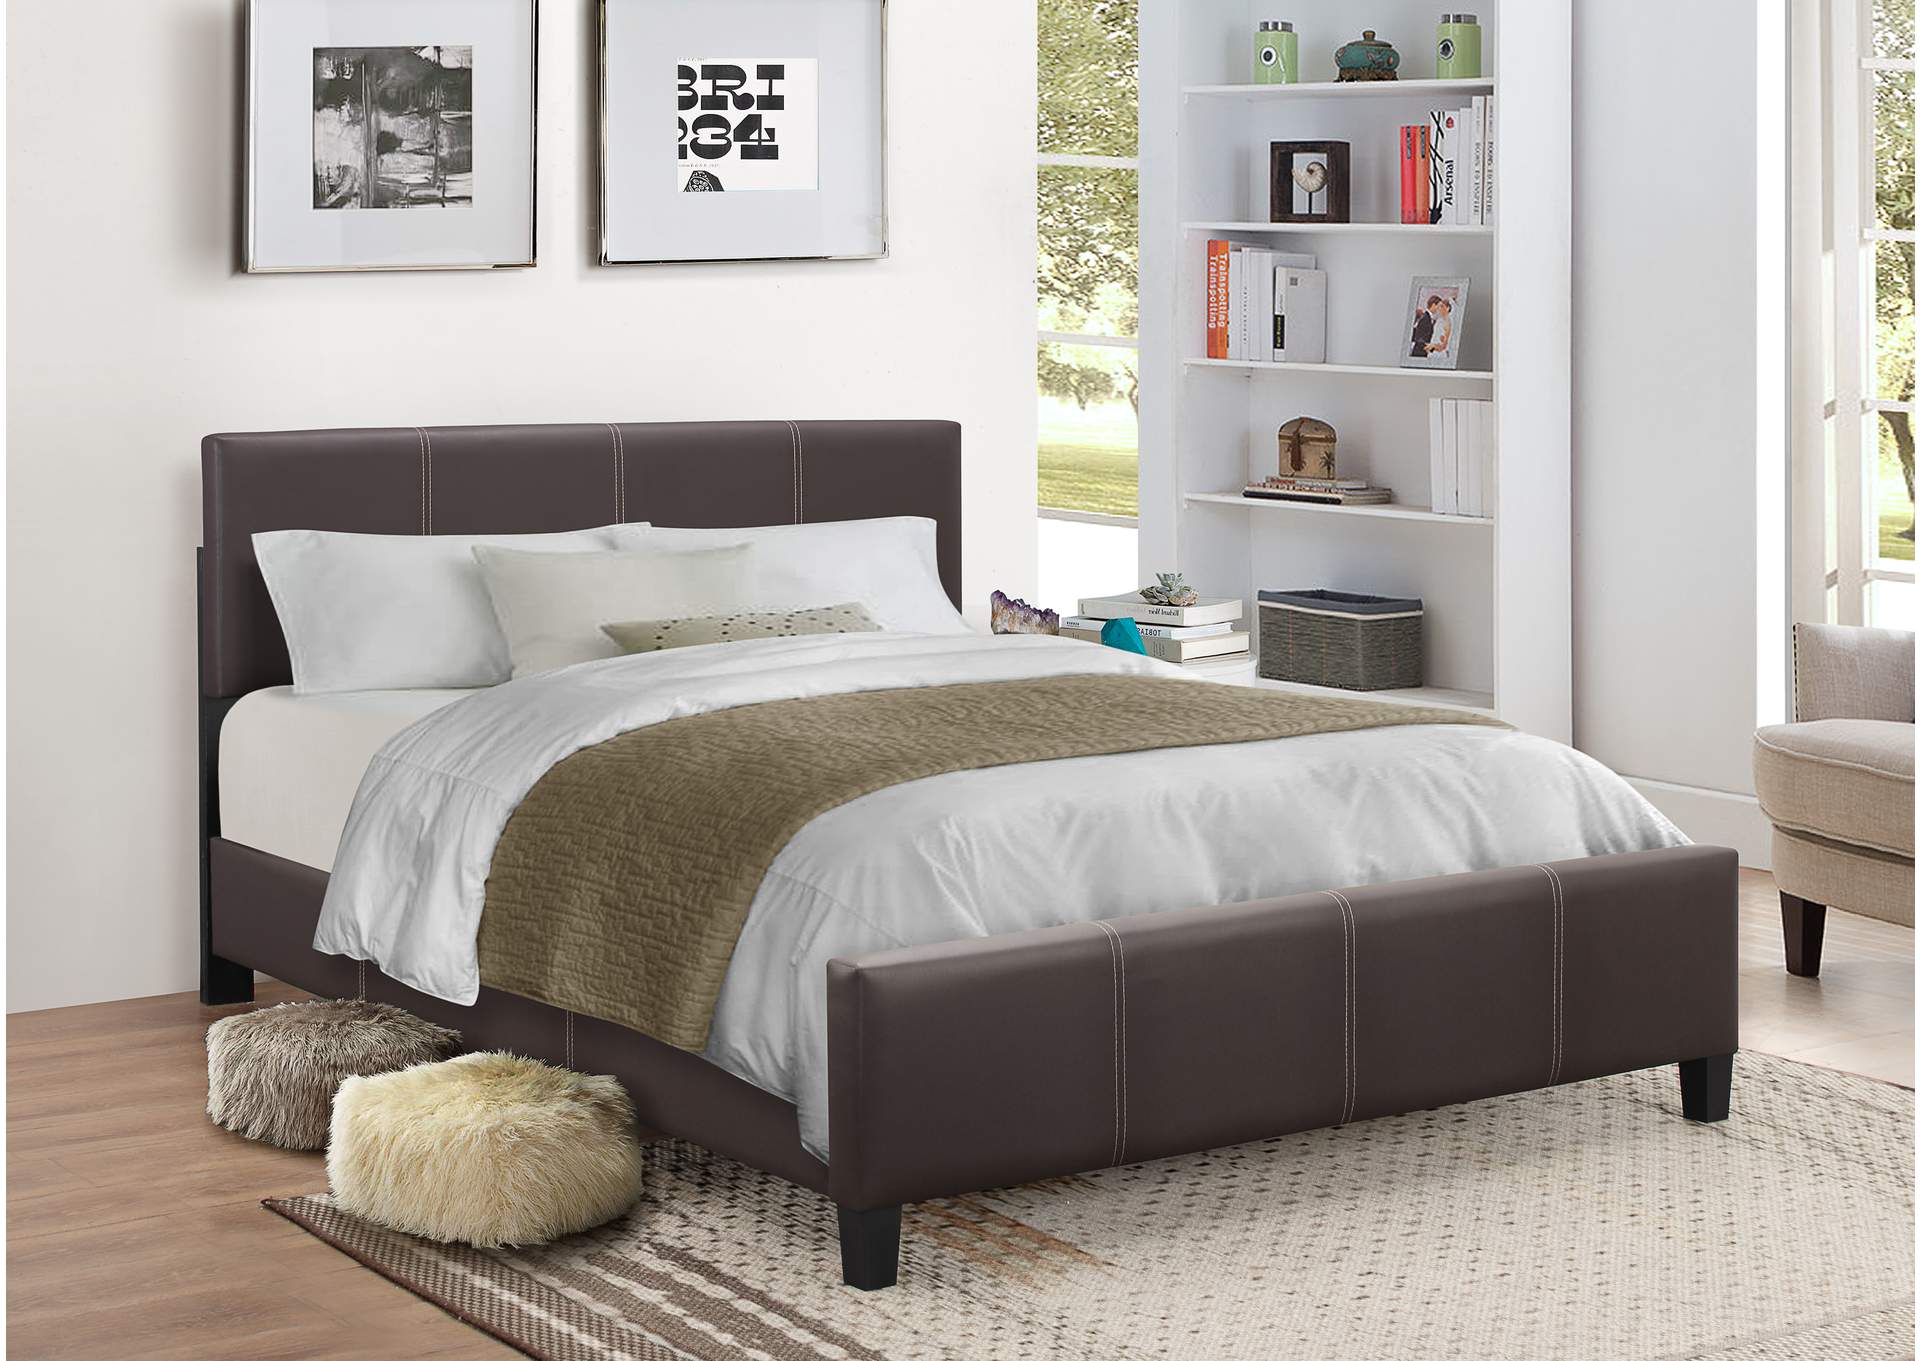 Brown Queen Bed,Global Trading